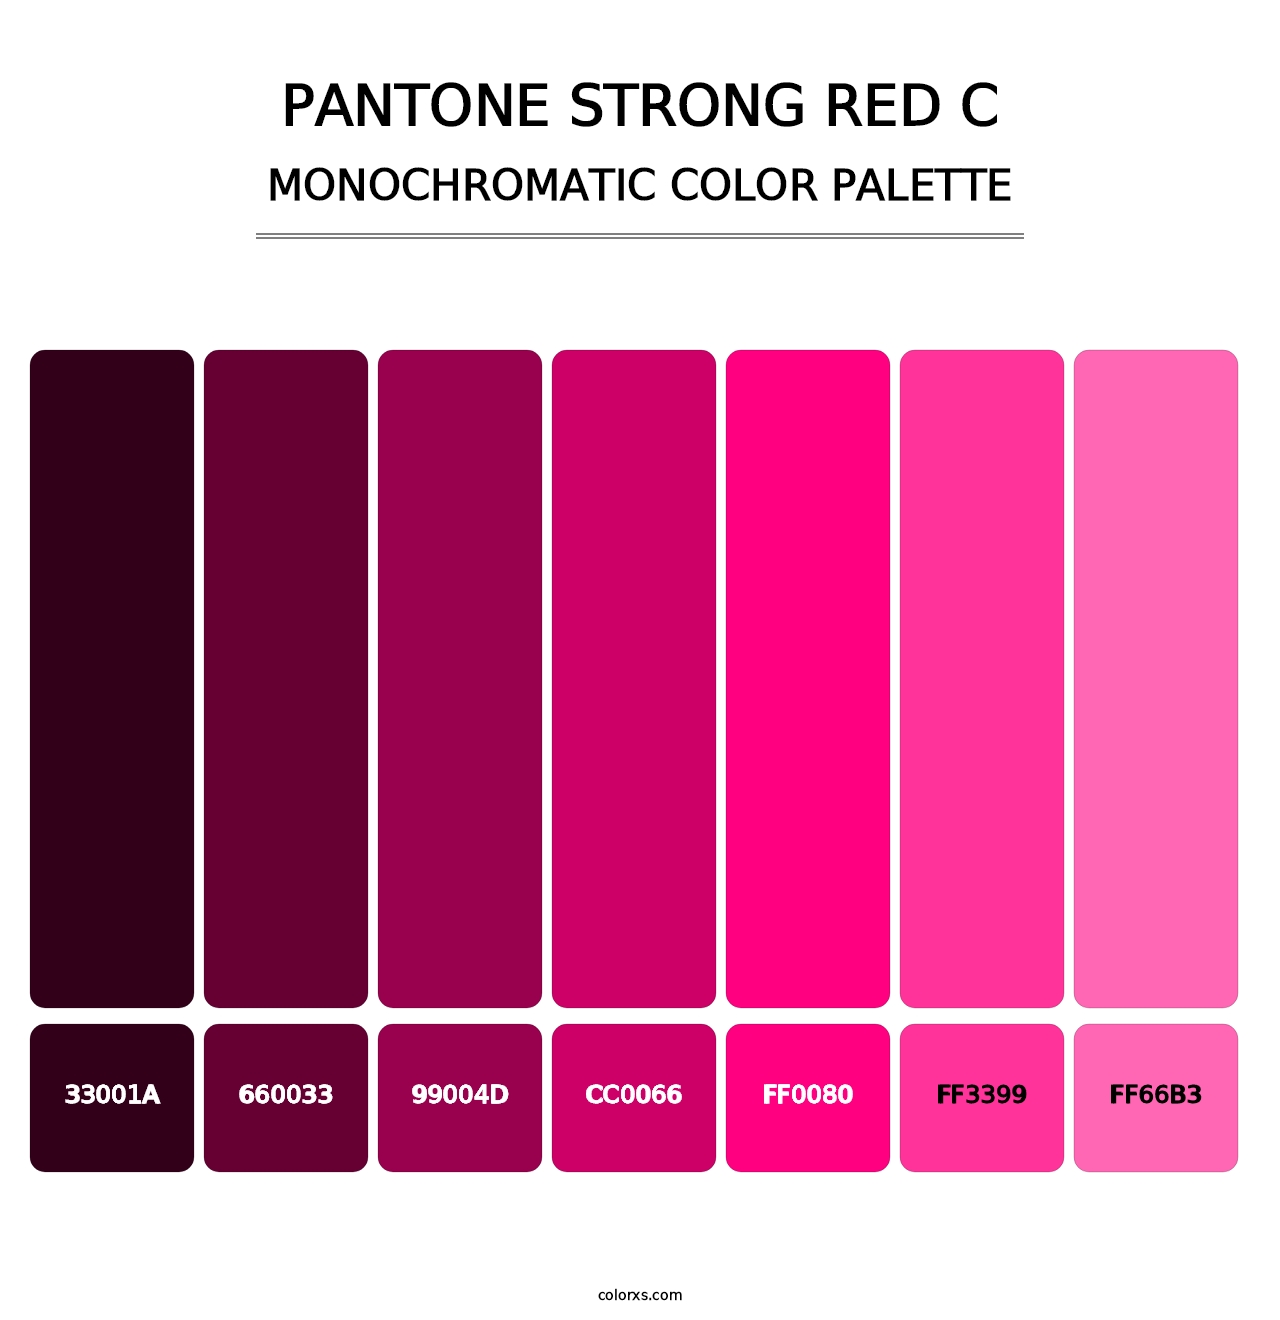 PANTONE Strong Red C - Monochromatic Color Palette